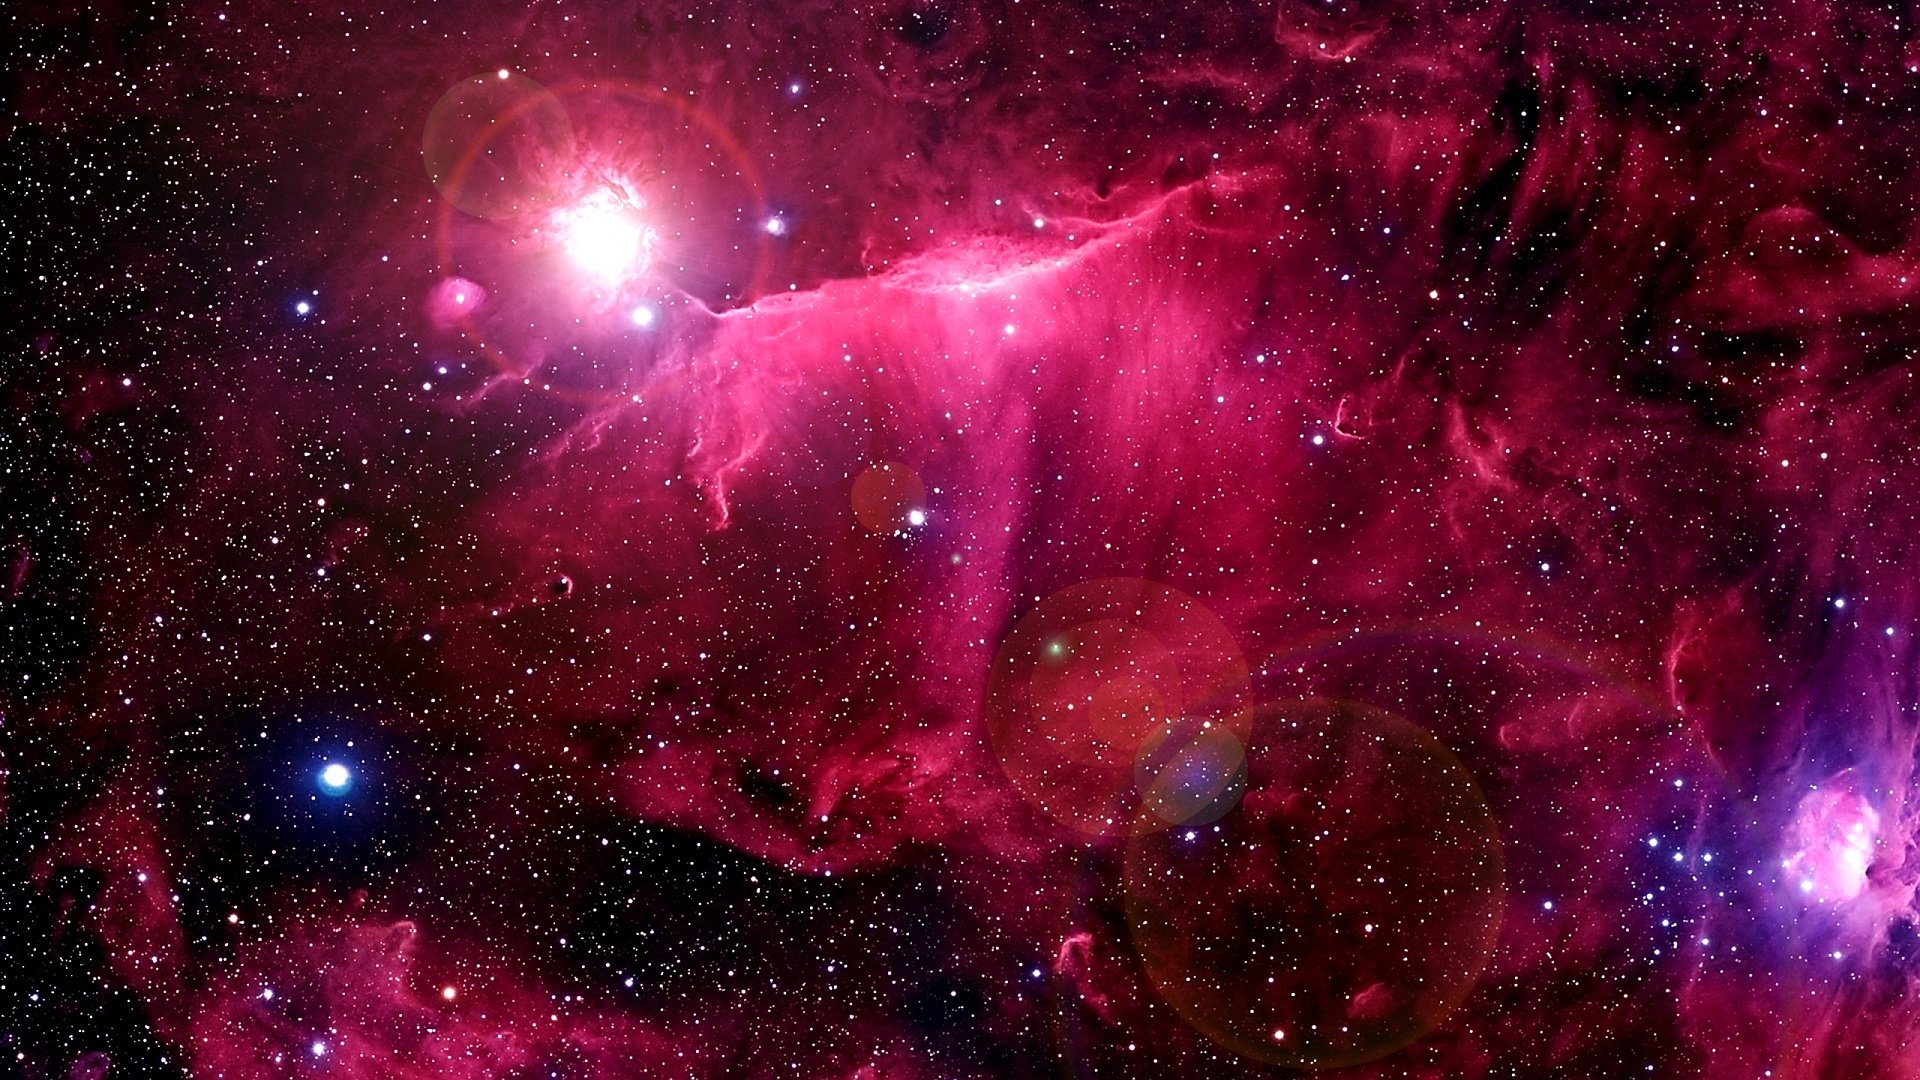 nebula wallpaper 1920x1080,nebula,outer space,pink,astronomical object,celestial event